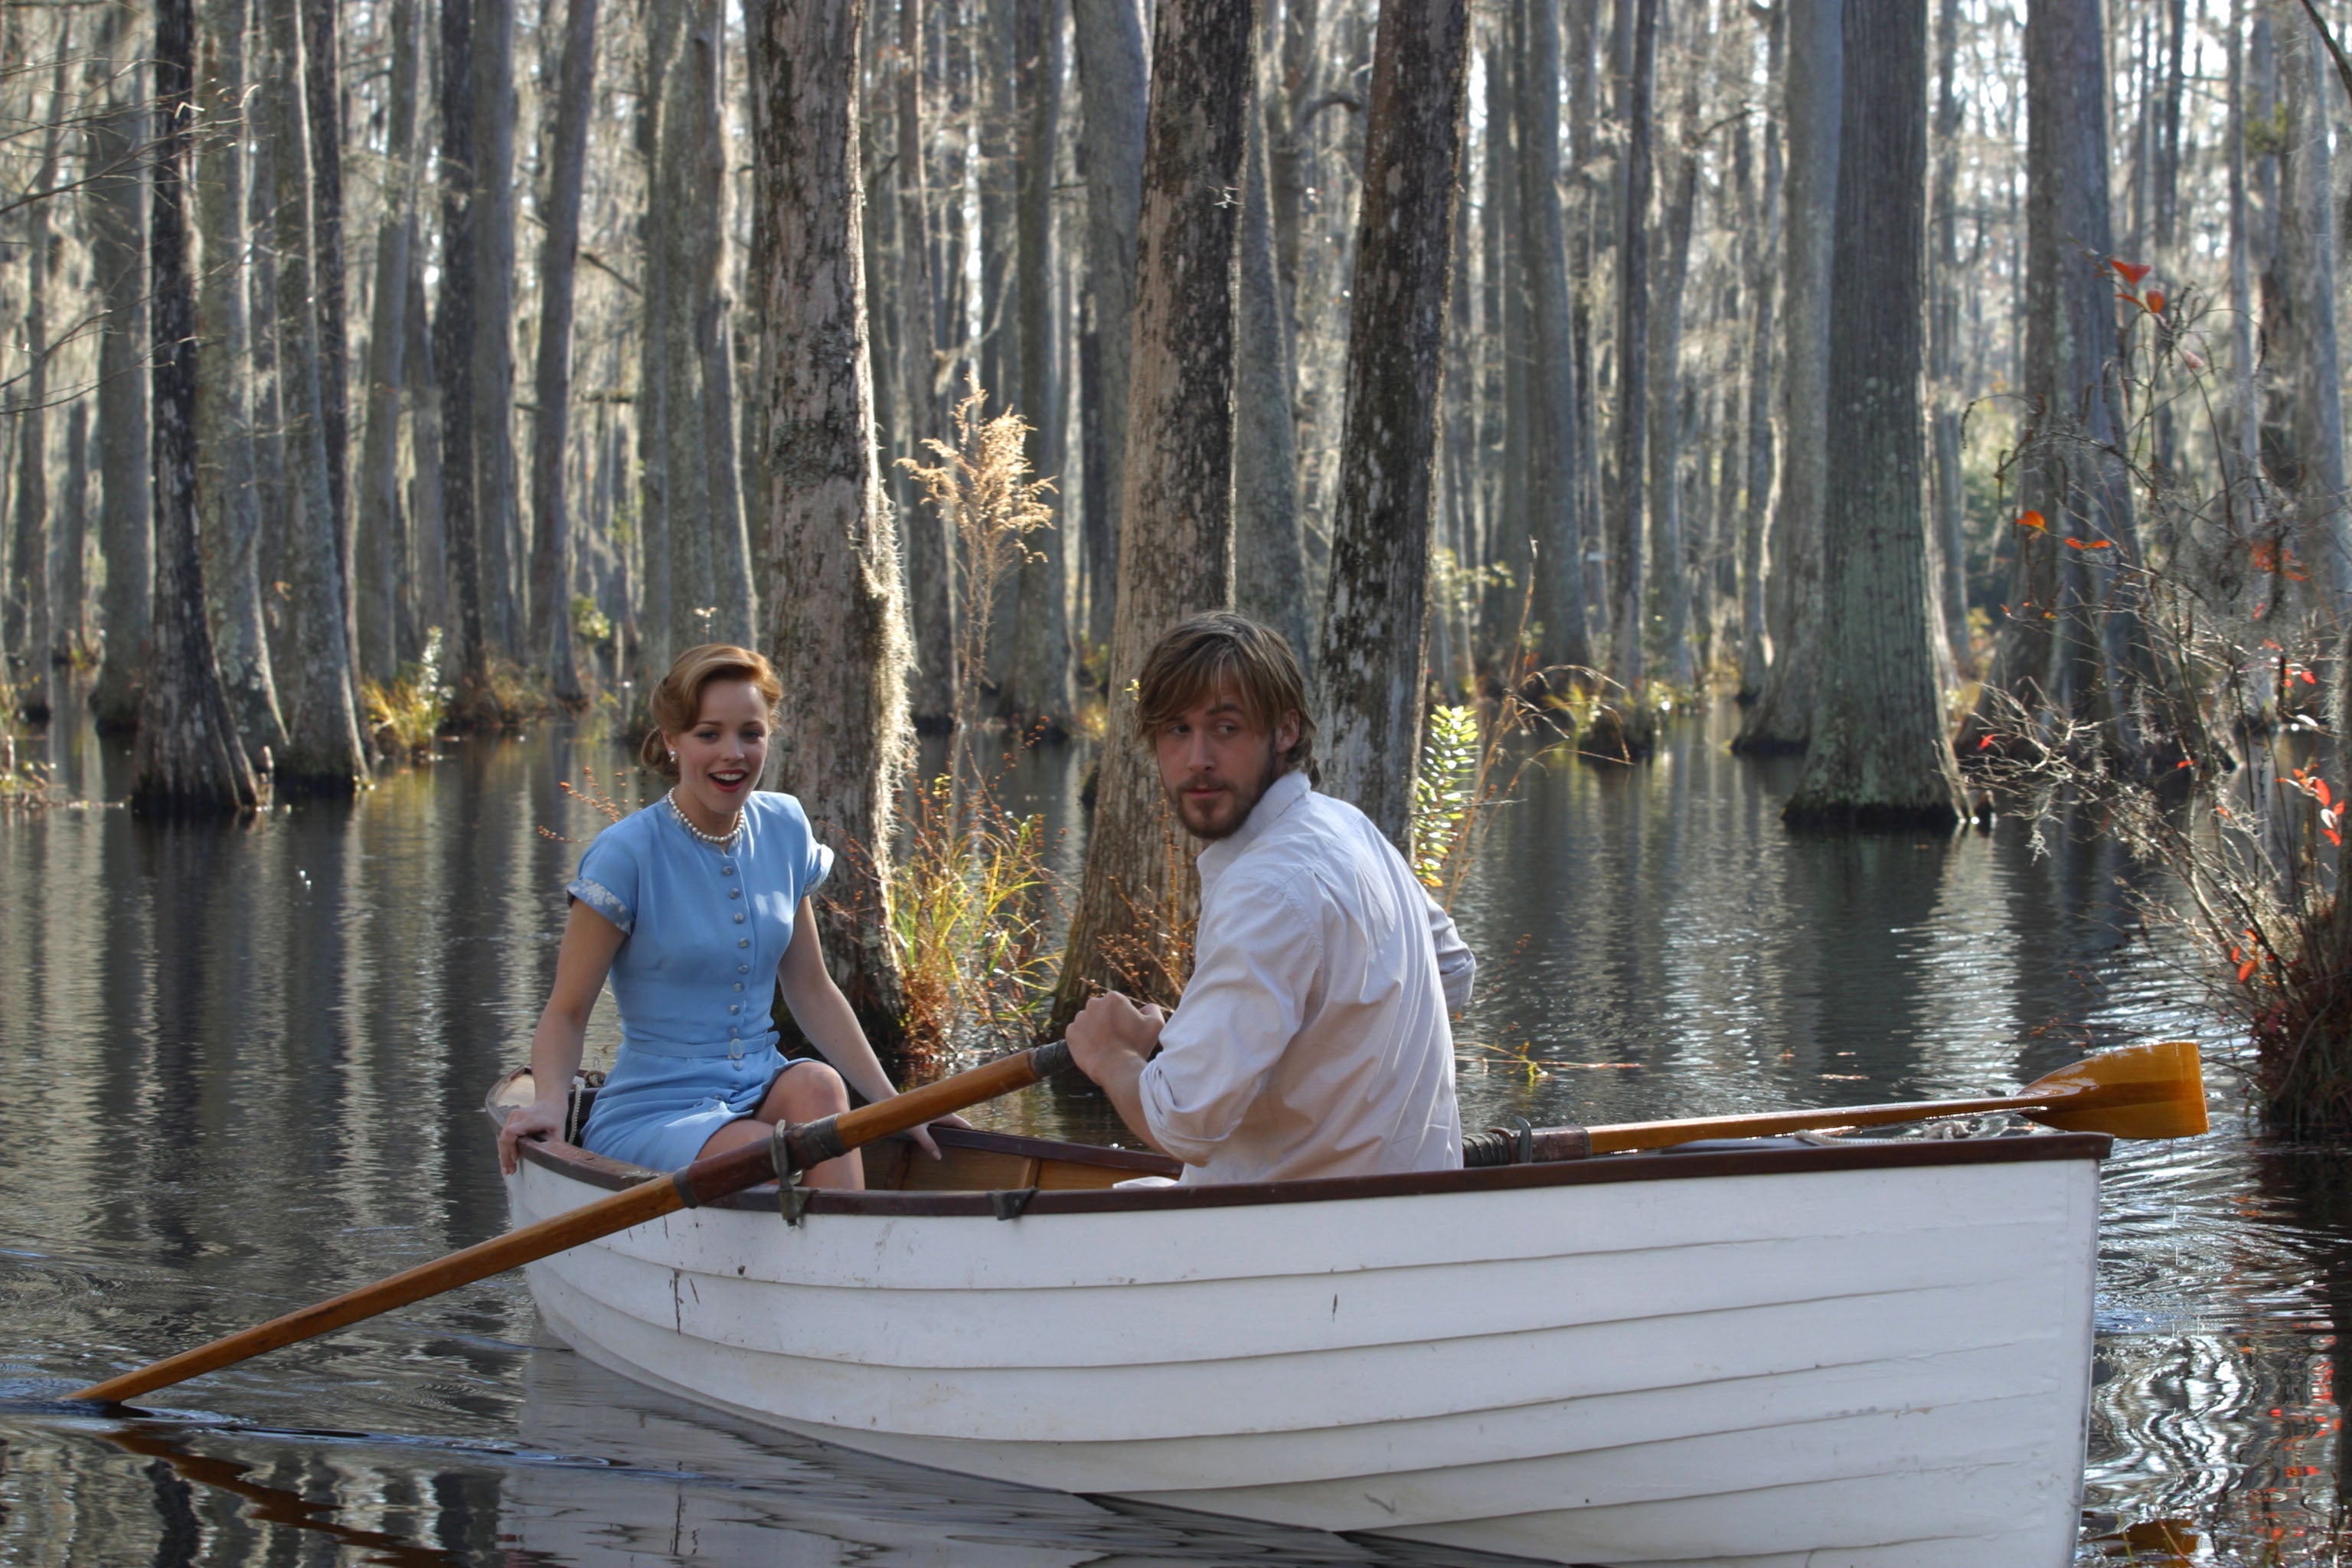 The rowing boat scene is set in summer but was filmed in chilly winter temperatures